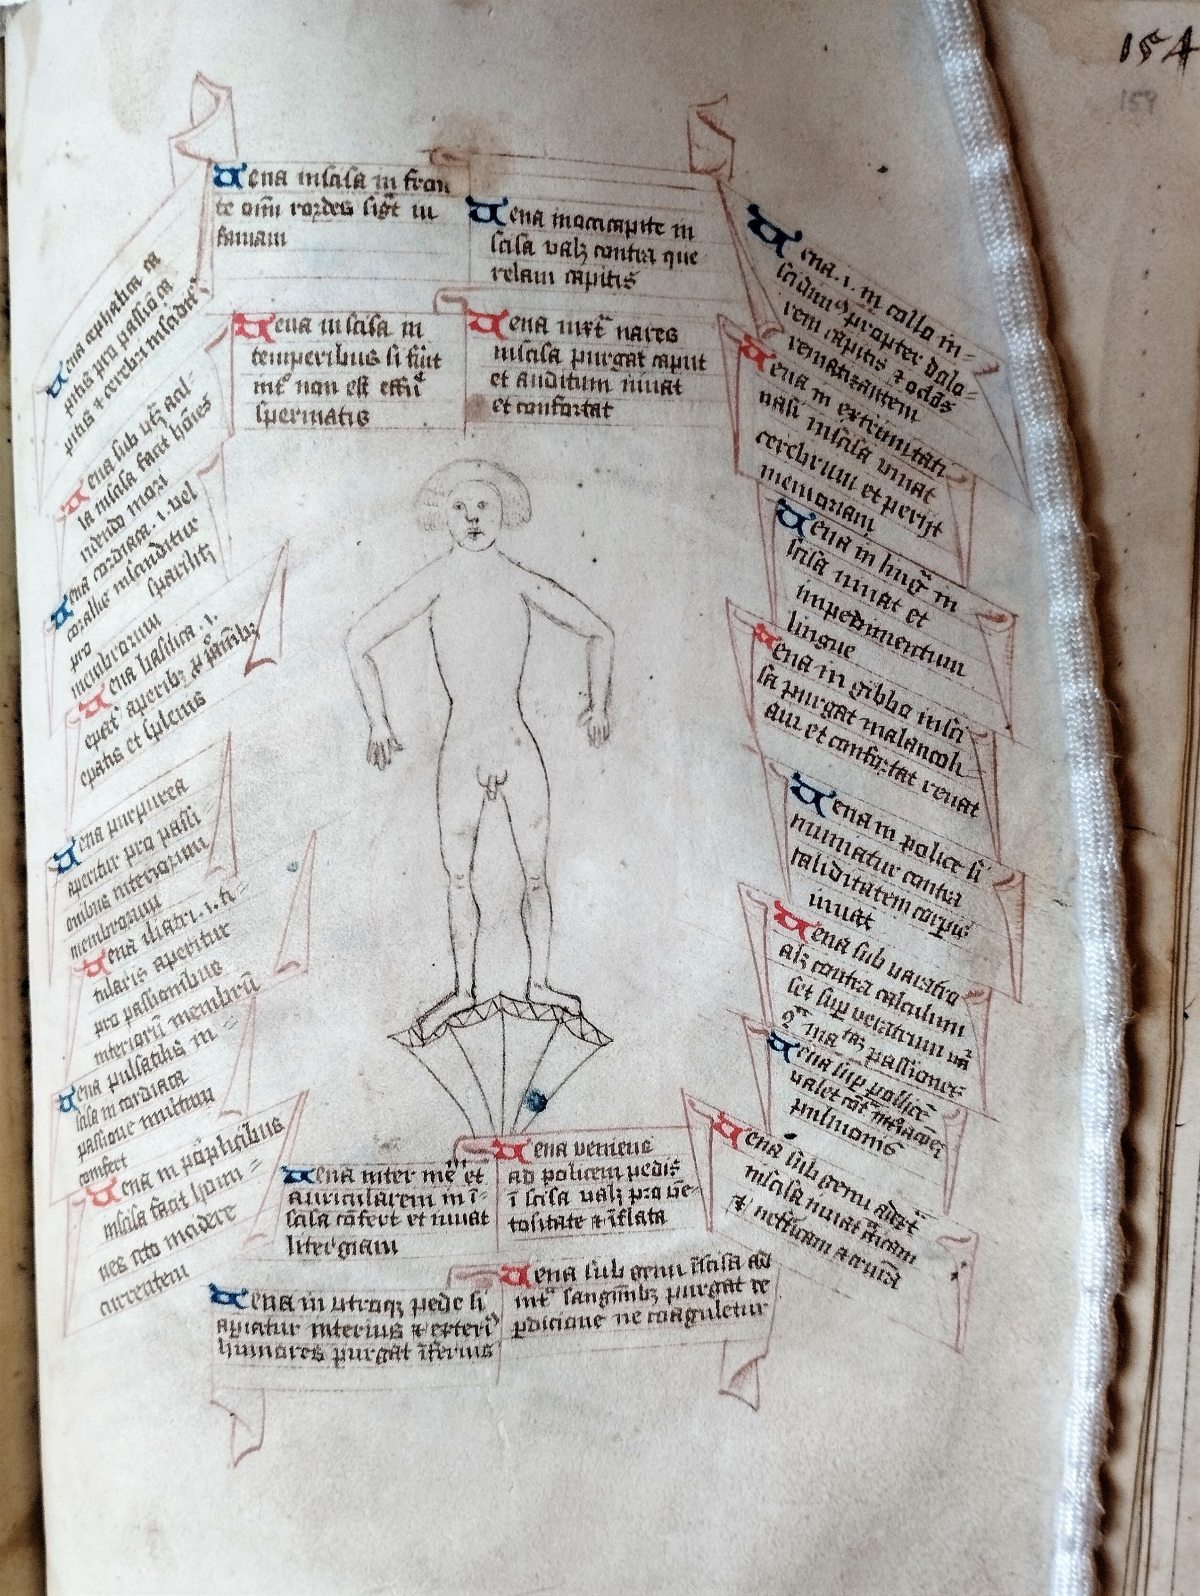 Drawing of a human figure surrounded by Latin text related to the zodiac and its effects on the human body.